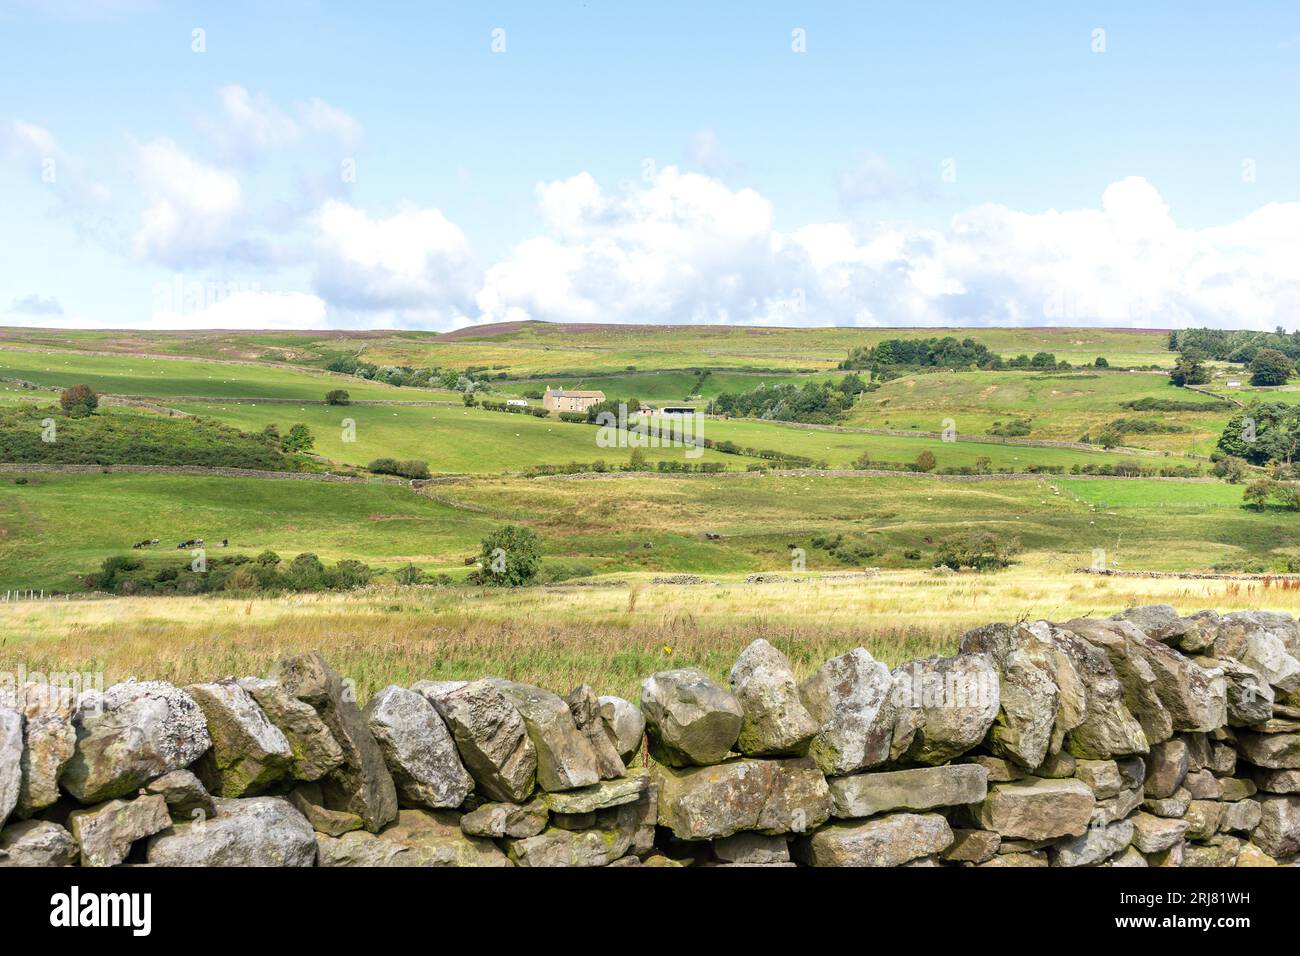 Landscape with farmhouse in the North Pennines near Stanhope, County Durham, England, United Kingdom Stock Photo